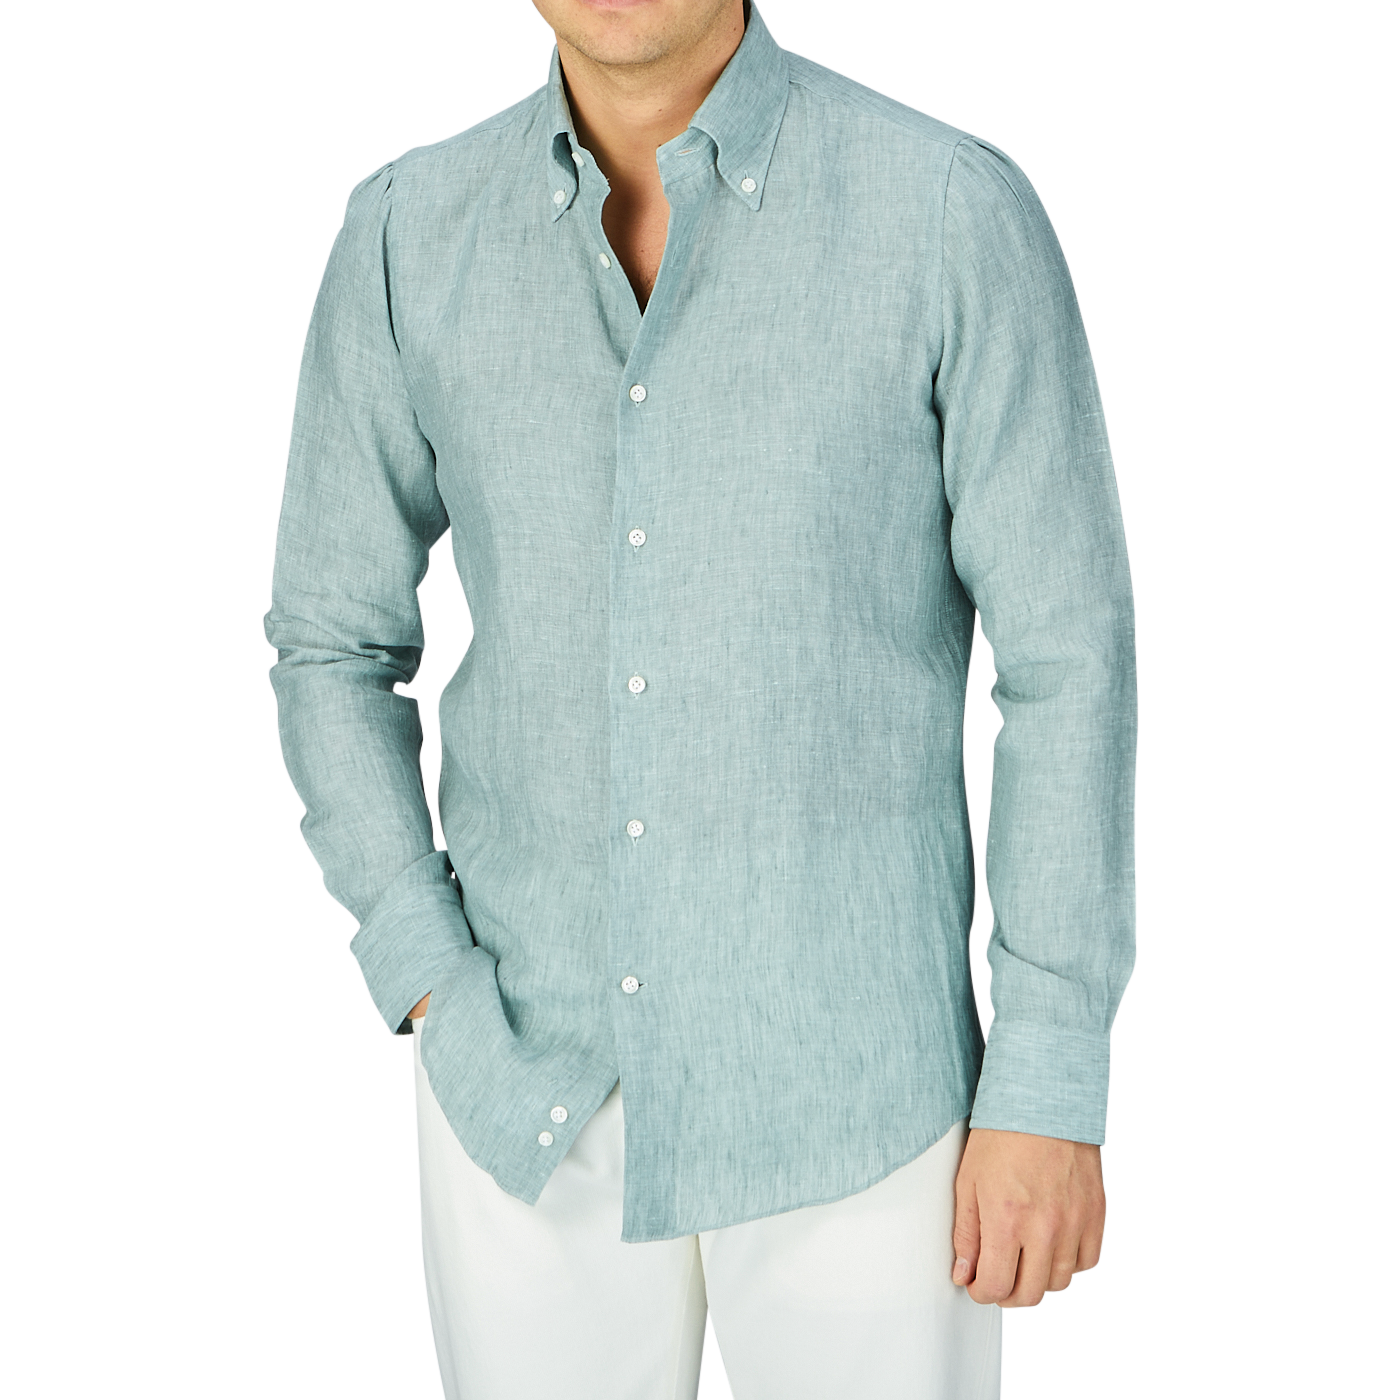 A person wearing a teal green organic linen BD slim shirt from the Italian shirtmaker Mazzarelli and white trousers.